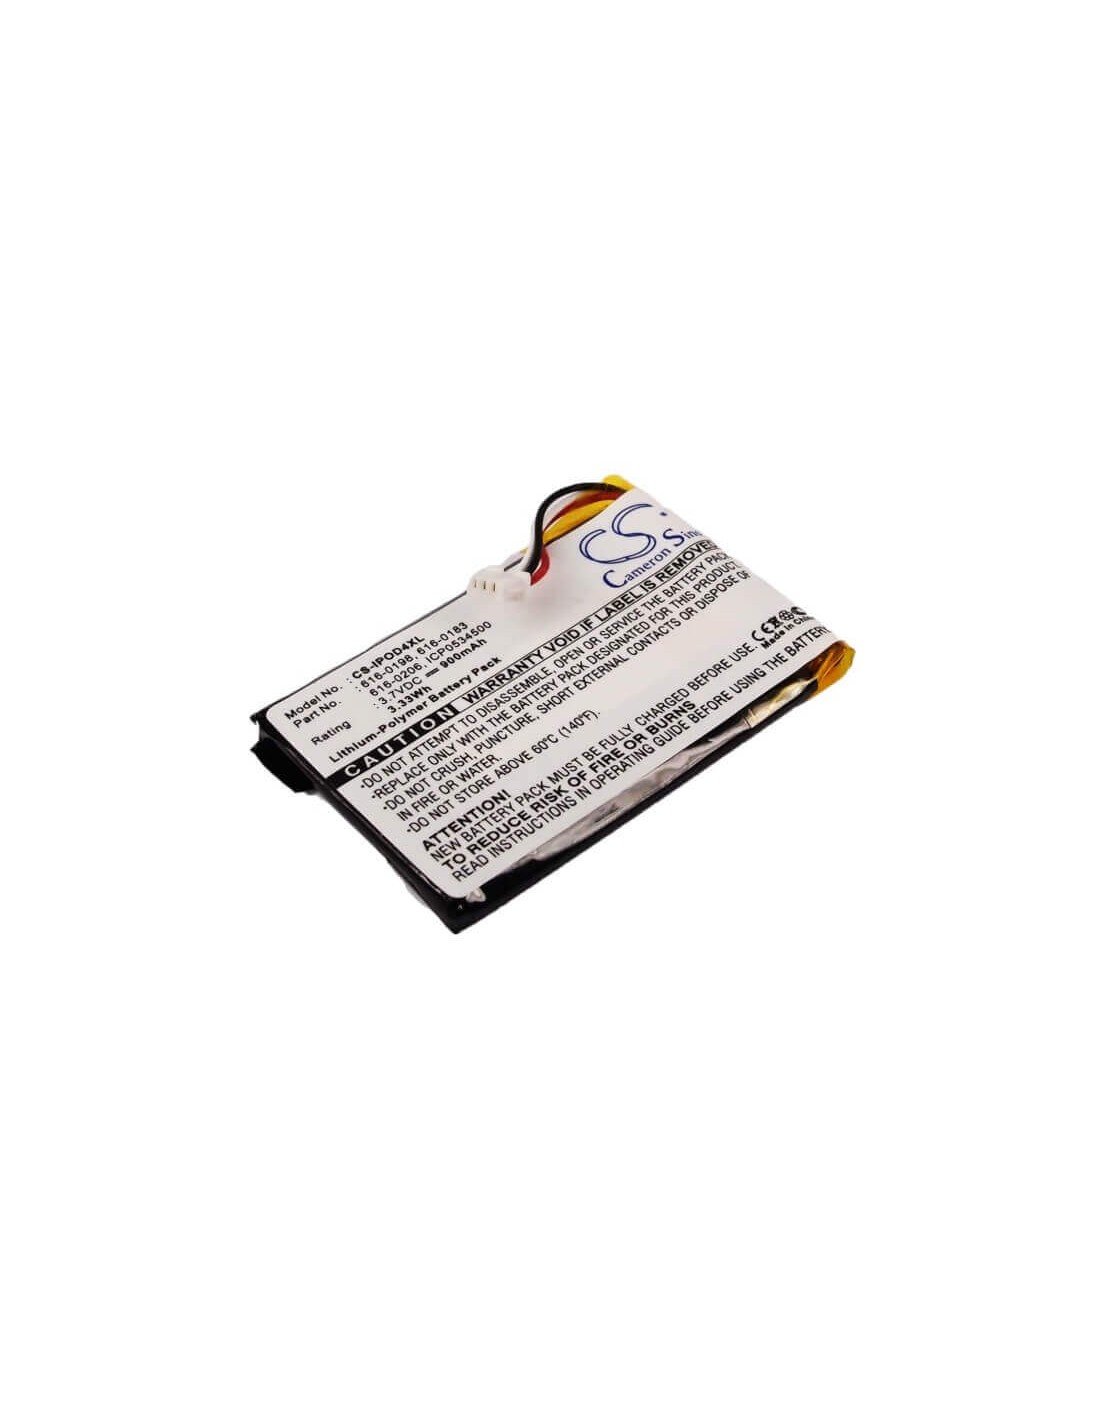 Battery for Apple Ipod 4th Generation, Ipod Photo, Photo 40gb M9585zr/a 3.7V, 900mAh - 3.33Wh